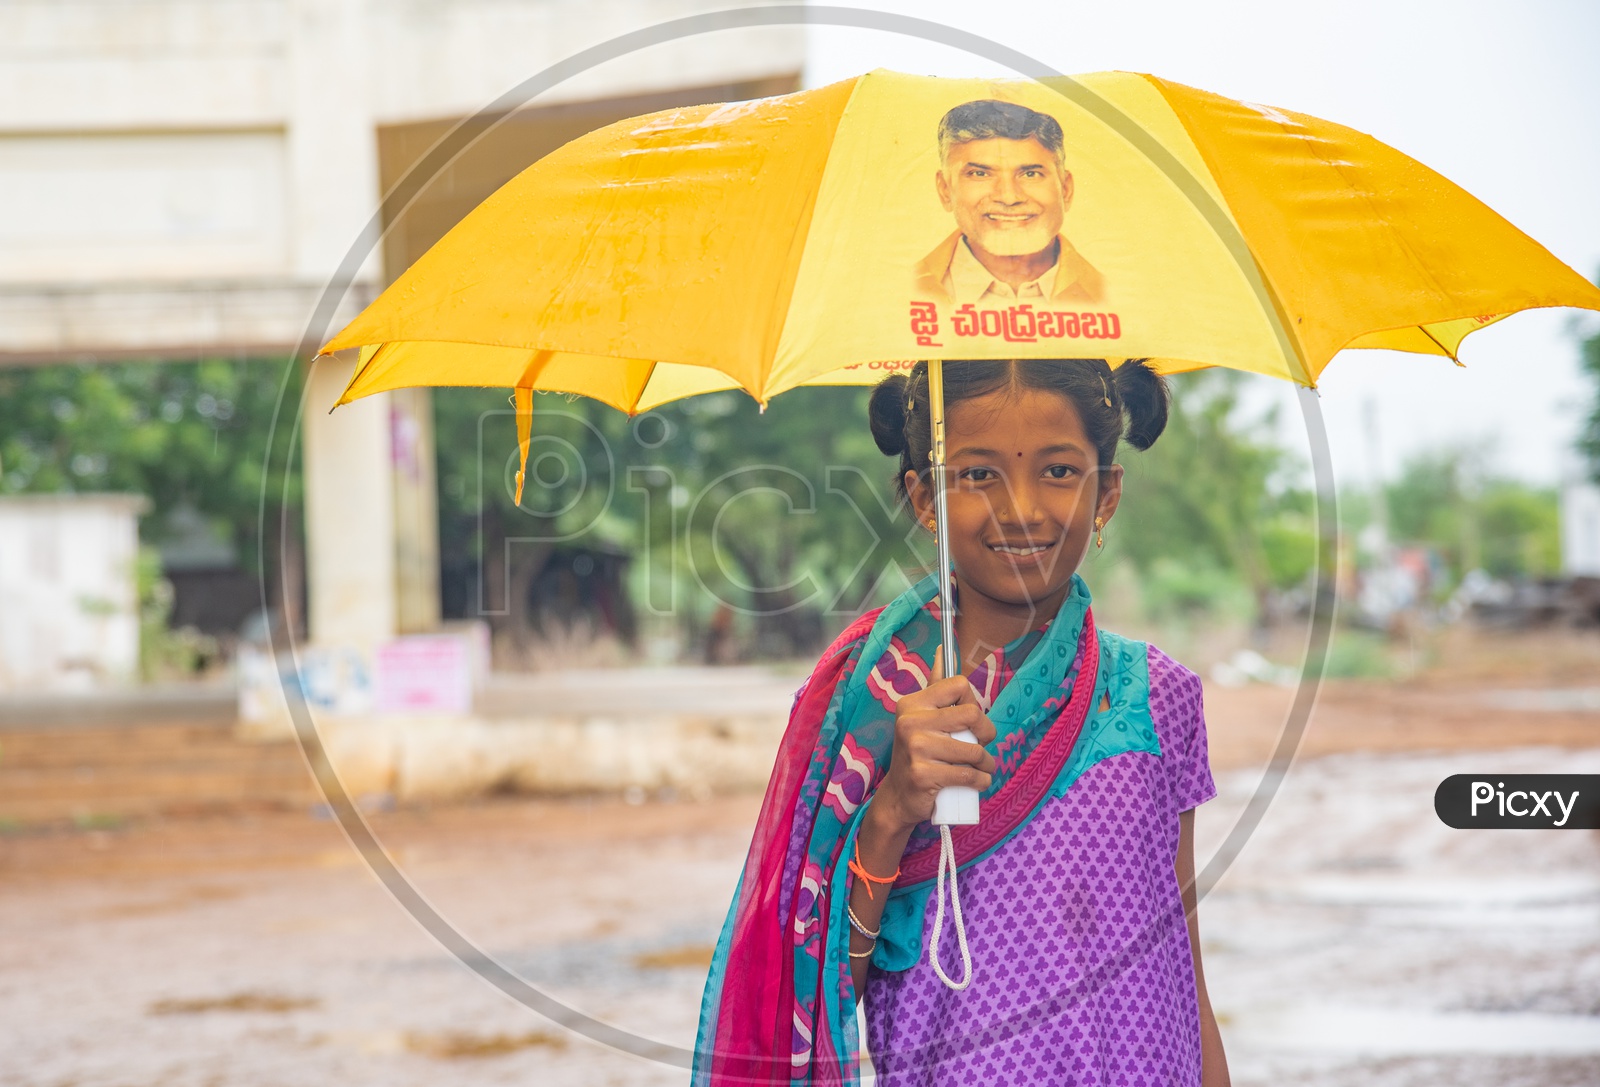 A girl carrying an umbrella with AP Chief Minister's image on it